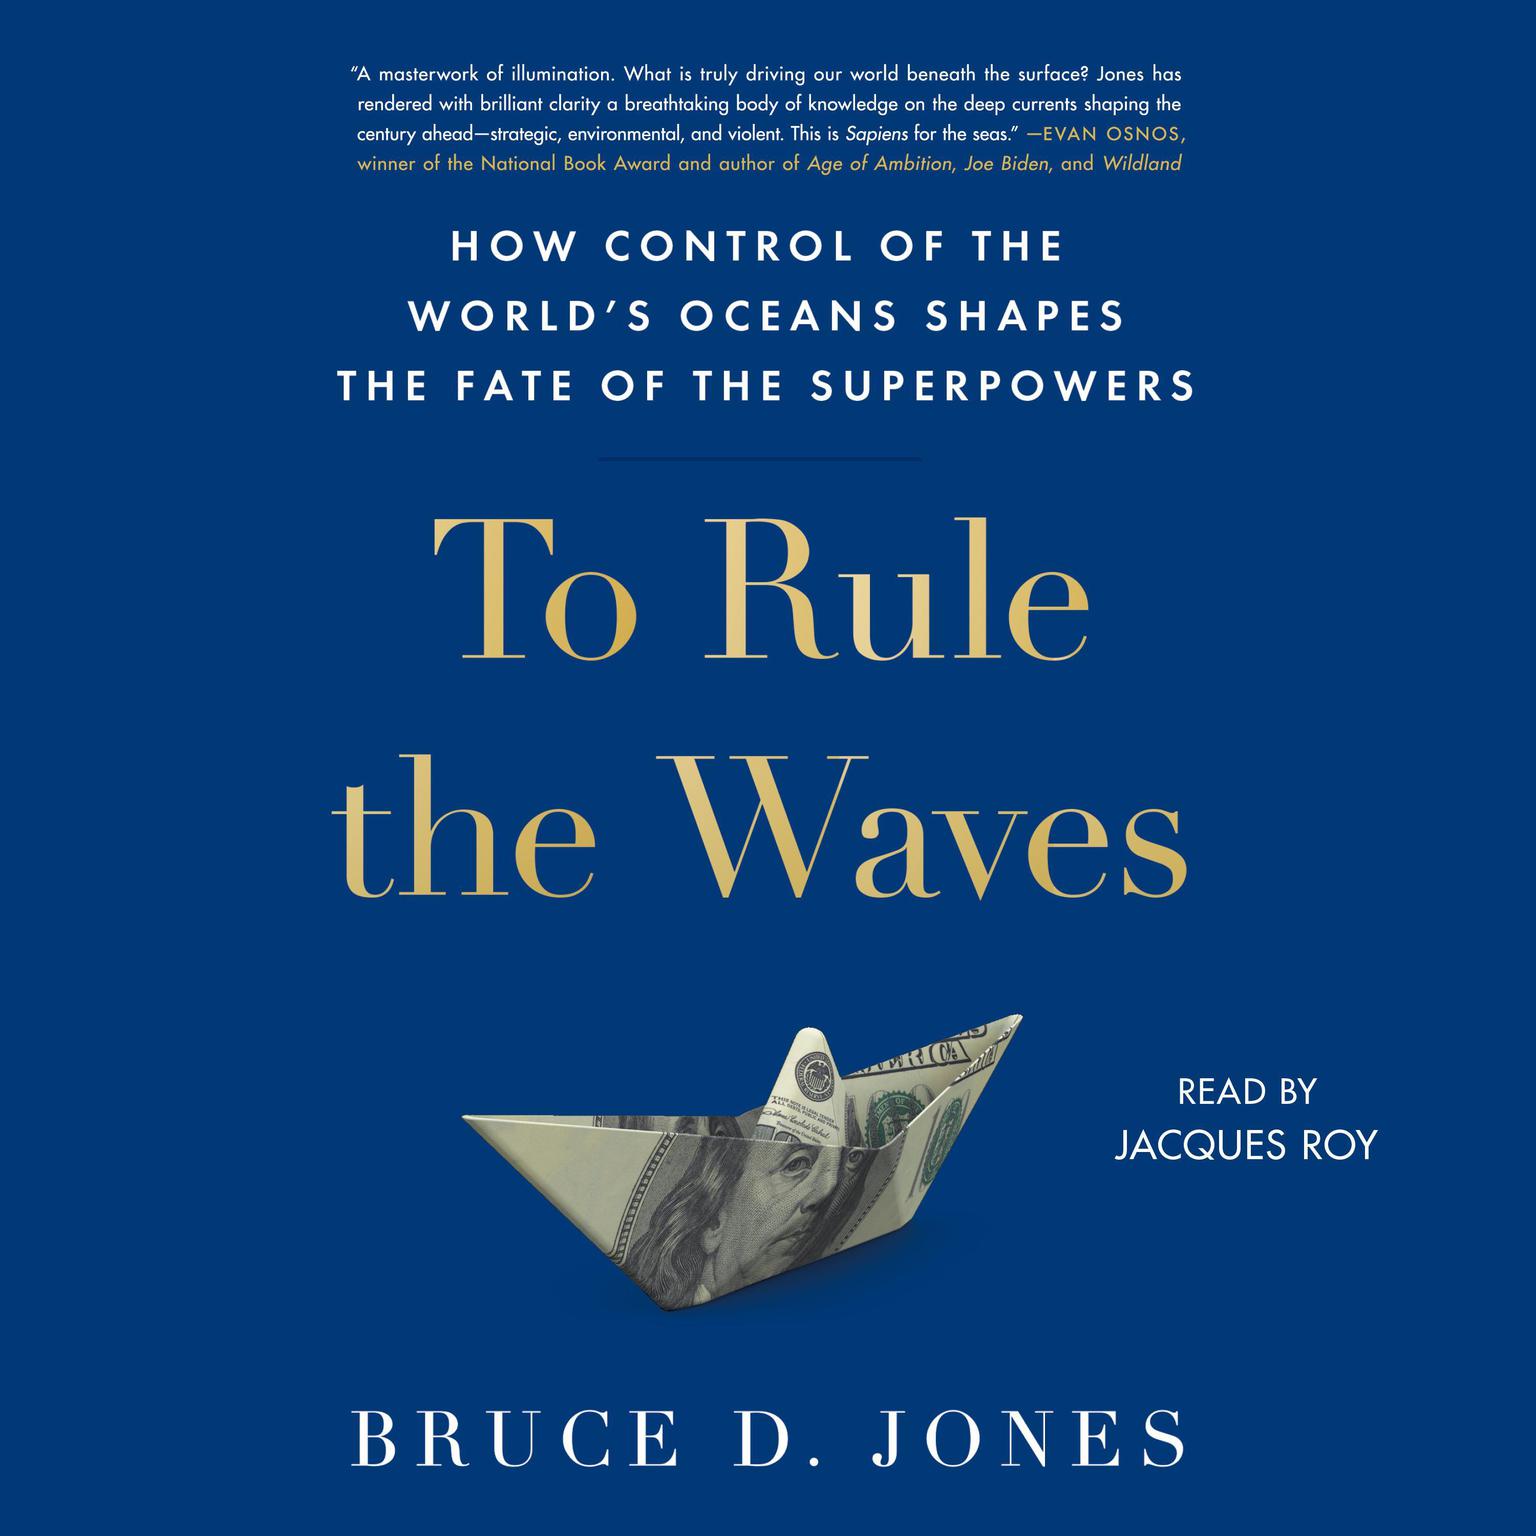 To Rule the Waves: How Control of the Worlds Oceans Determines the Fate of the Superpowers Audiobook, by Bruce Jones